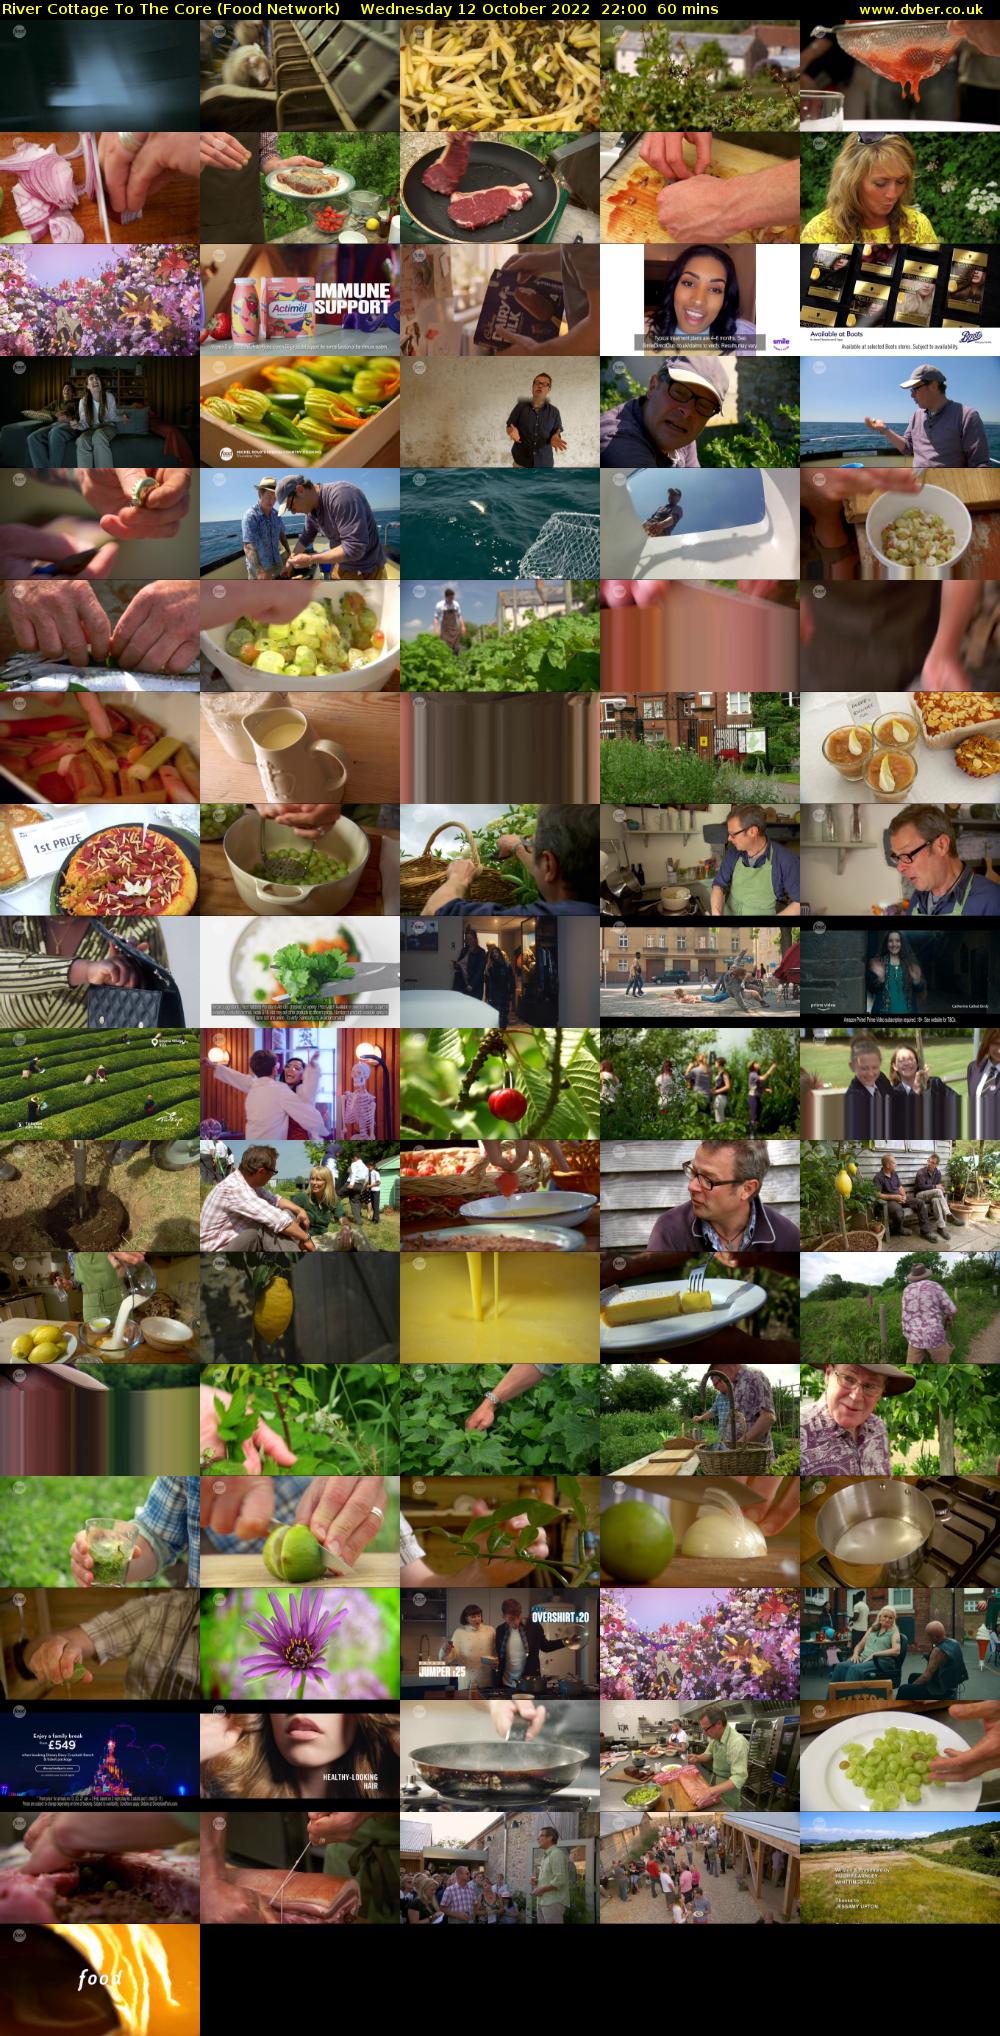 River Cottage To The Core (Food Network) Wednesday 12 October 2022 22:00 - 23:00